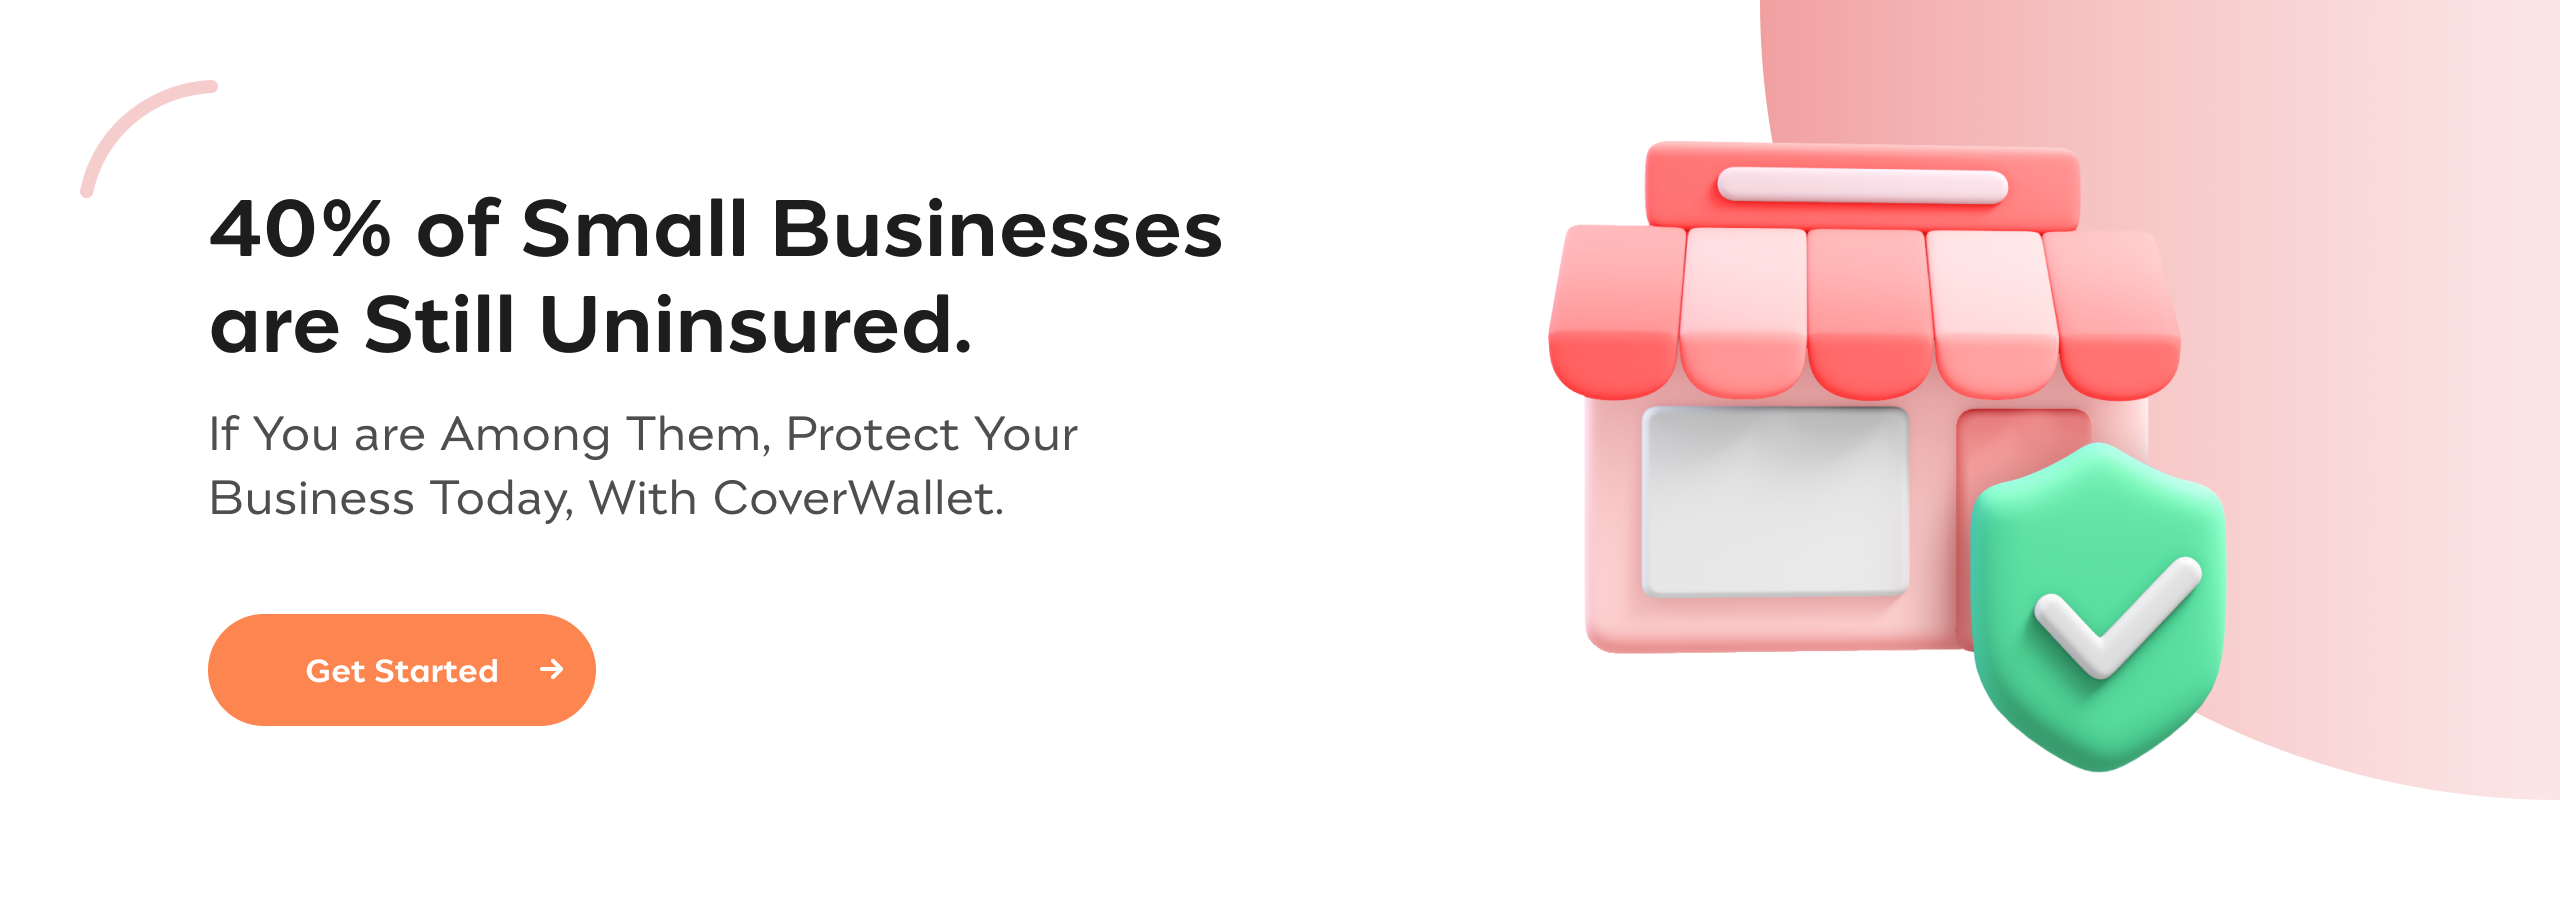 40% of Small Businesses Are Still Uninsured. If You Are Among Them, Protect Your Business Today with CoverWallet.